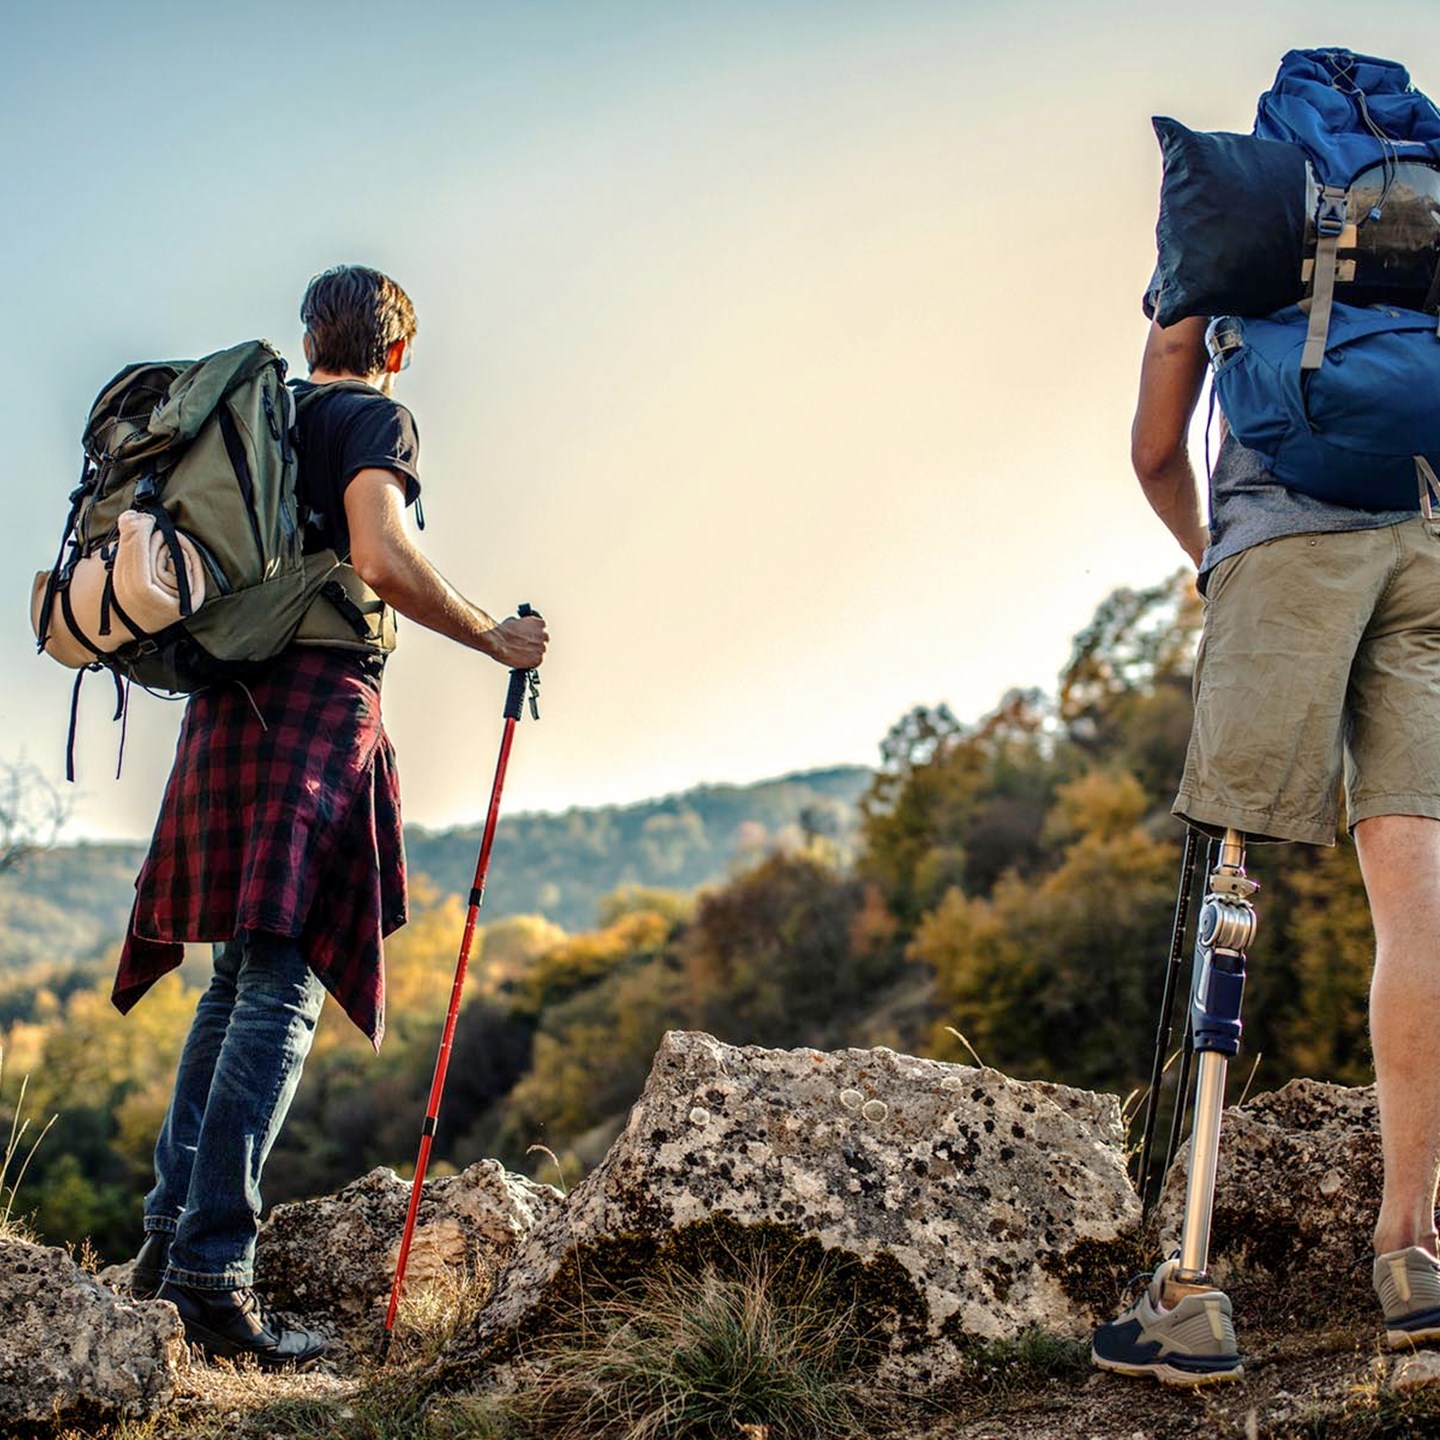 2 people hiking in the mountains with heavy backpacks on their backs. They are looking out into the distance. One of the hikers is amputee